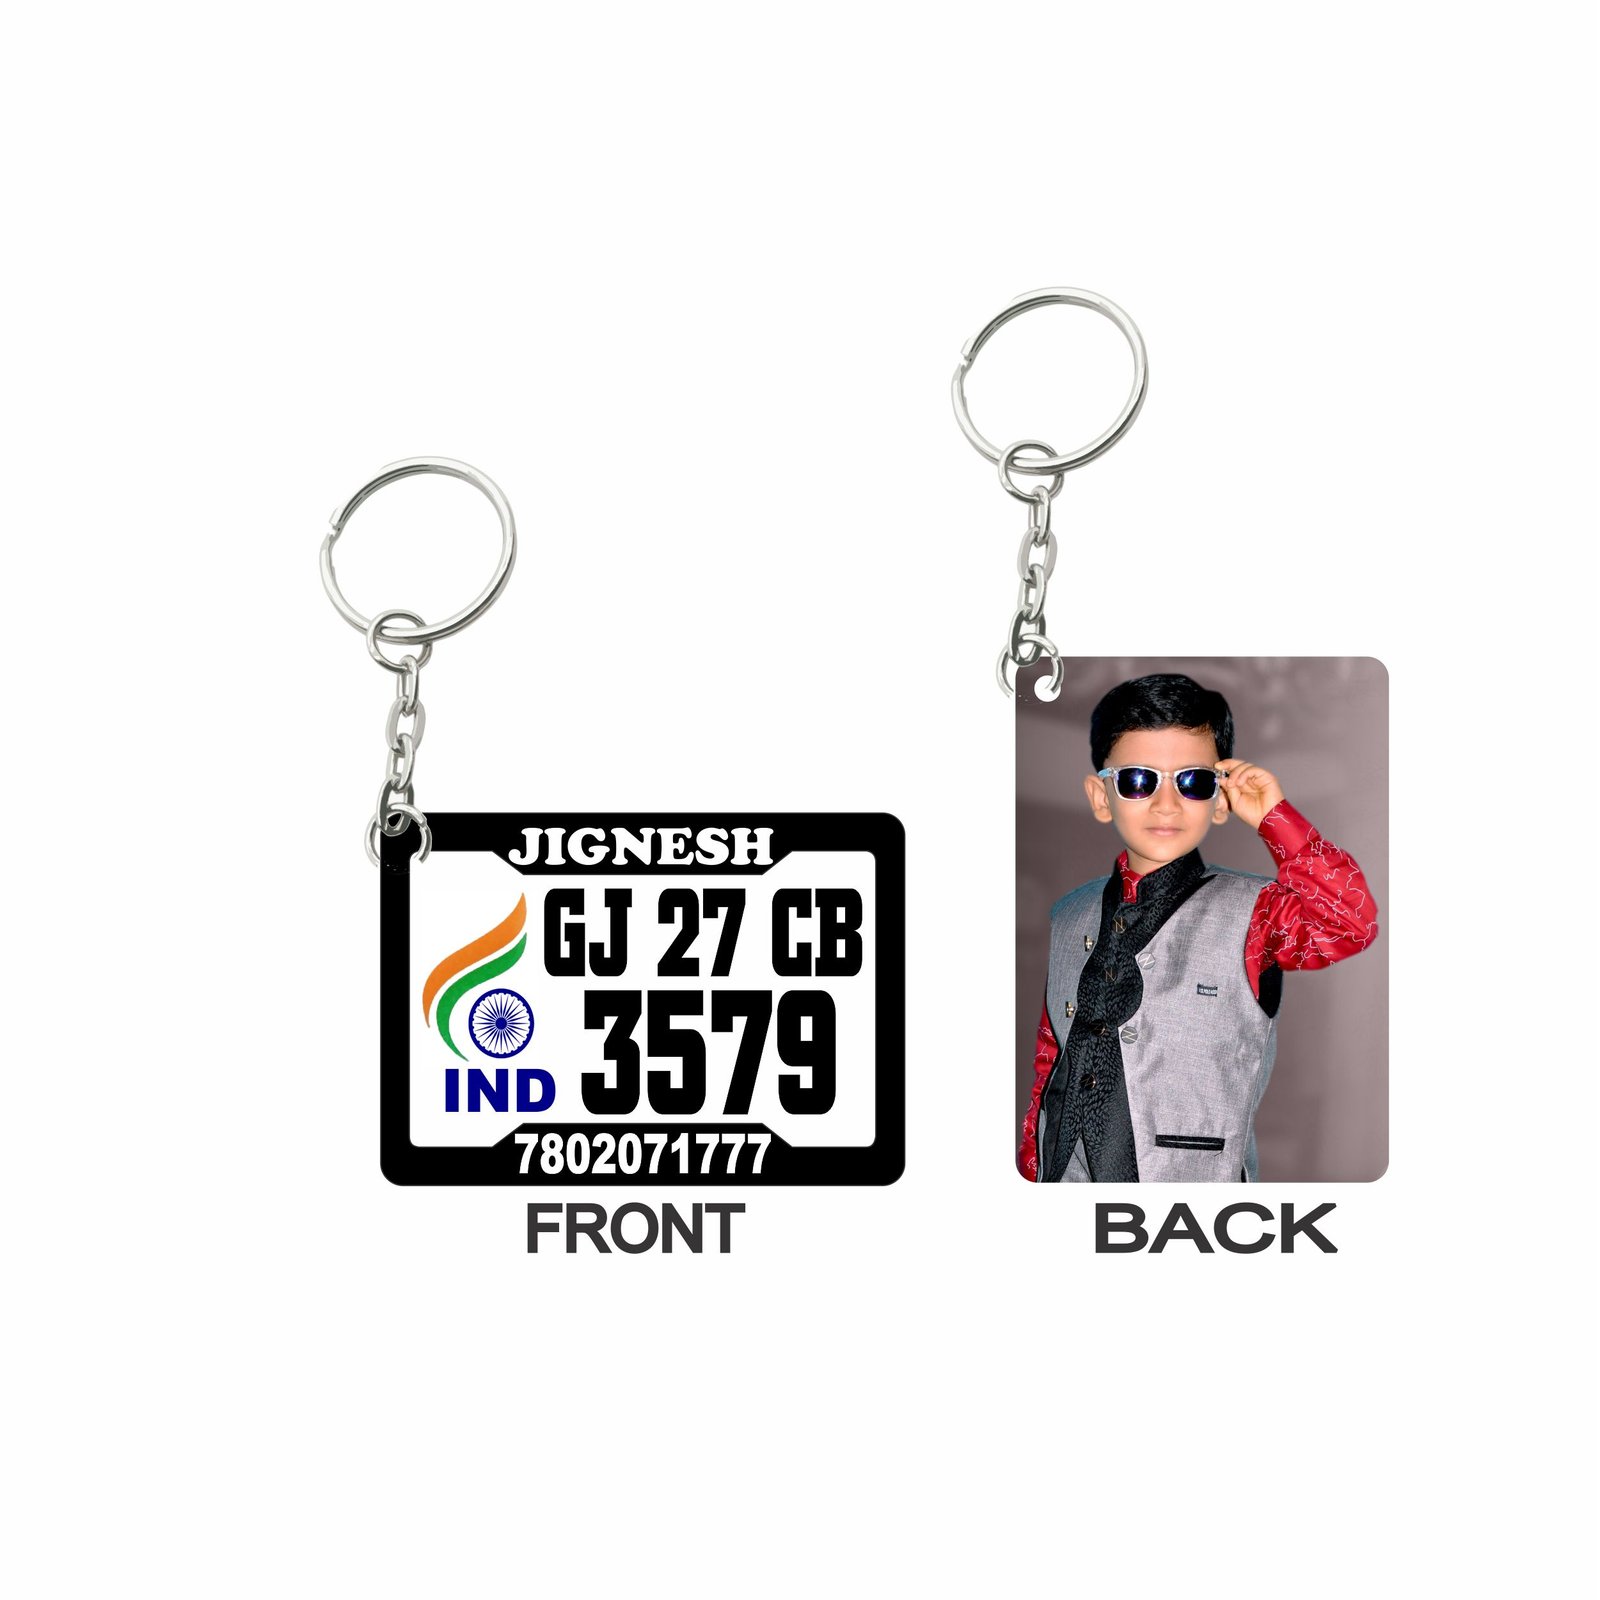 Personalize Acrylic Matrial Number Plate Key Chain With Photo